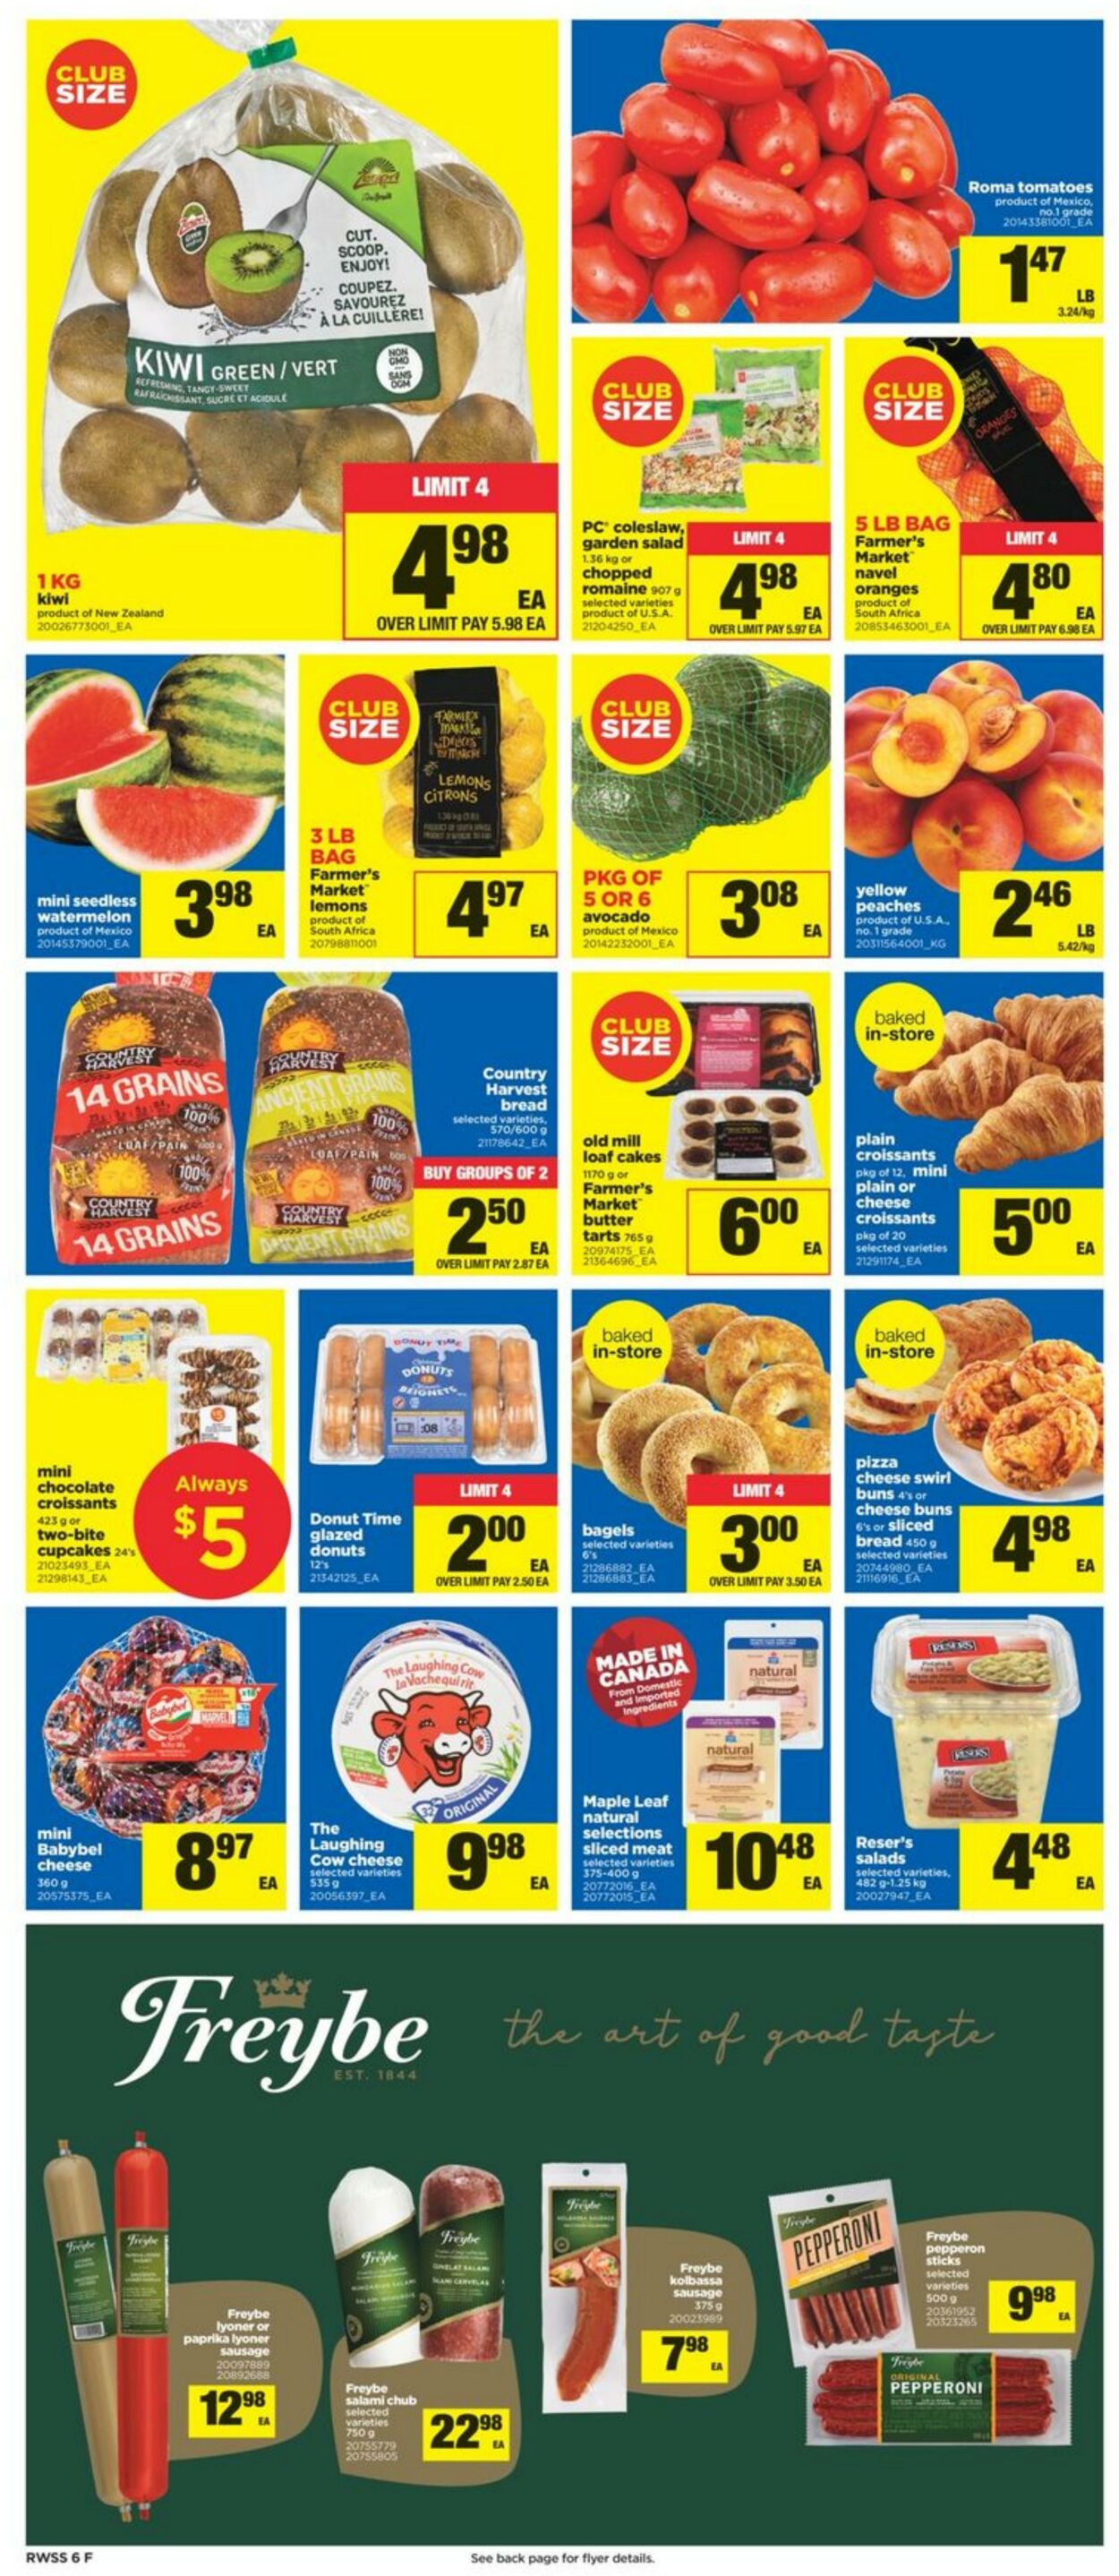 Flyer Real Canadian Superstore 15.10.2021 - 21.10.2021